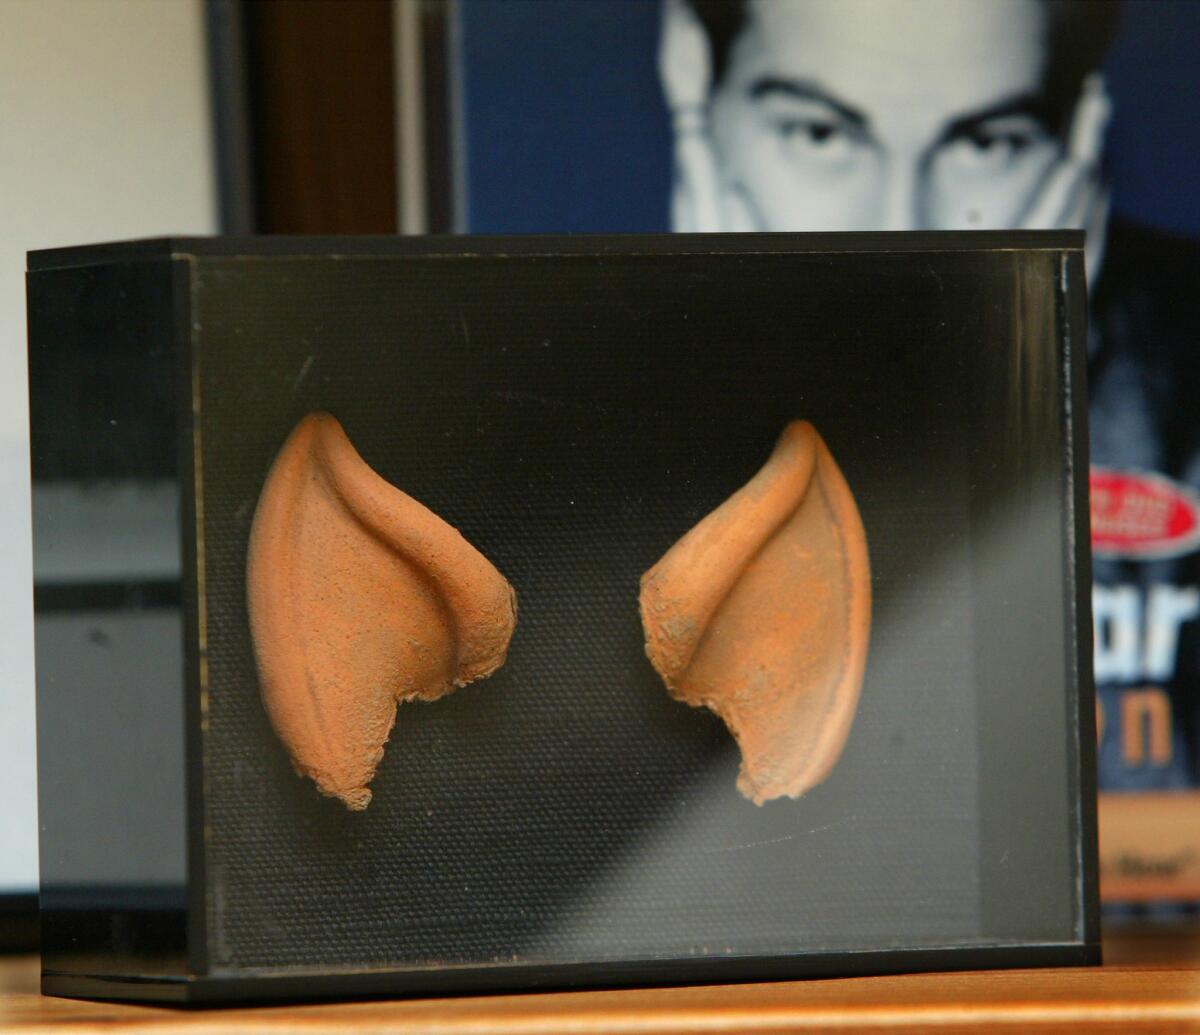 Leonard Nimoy's rubber ears from the 'Star Trek' series in his Bel-Air home.